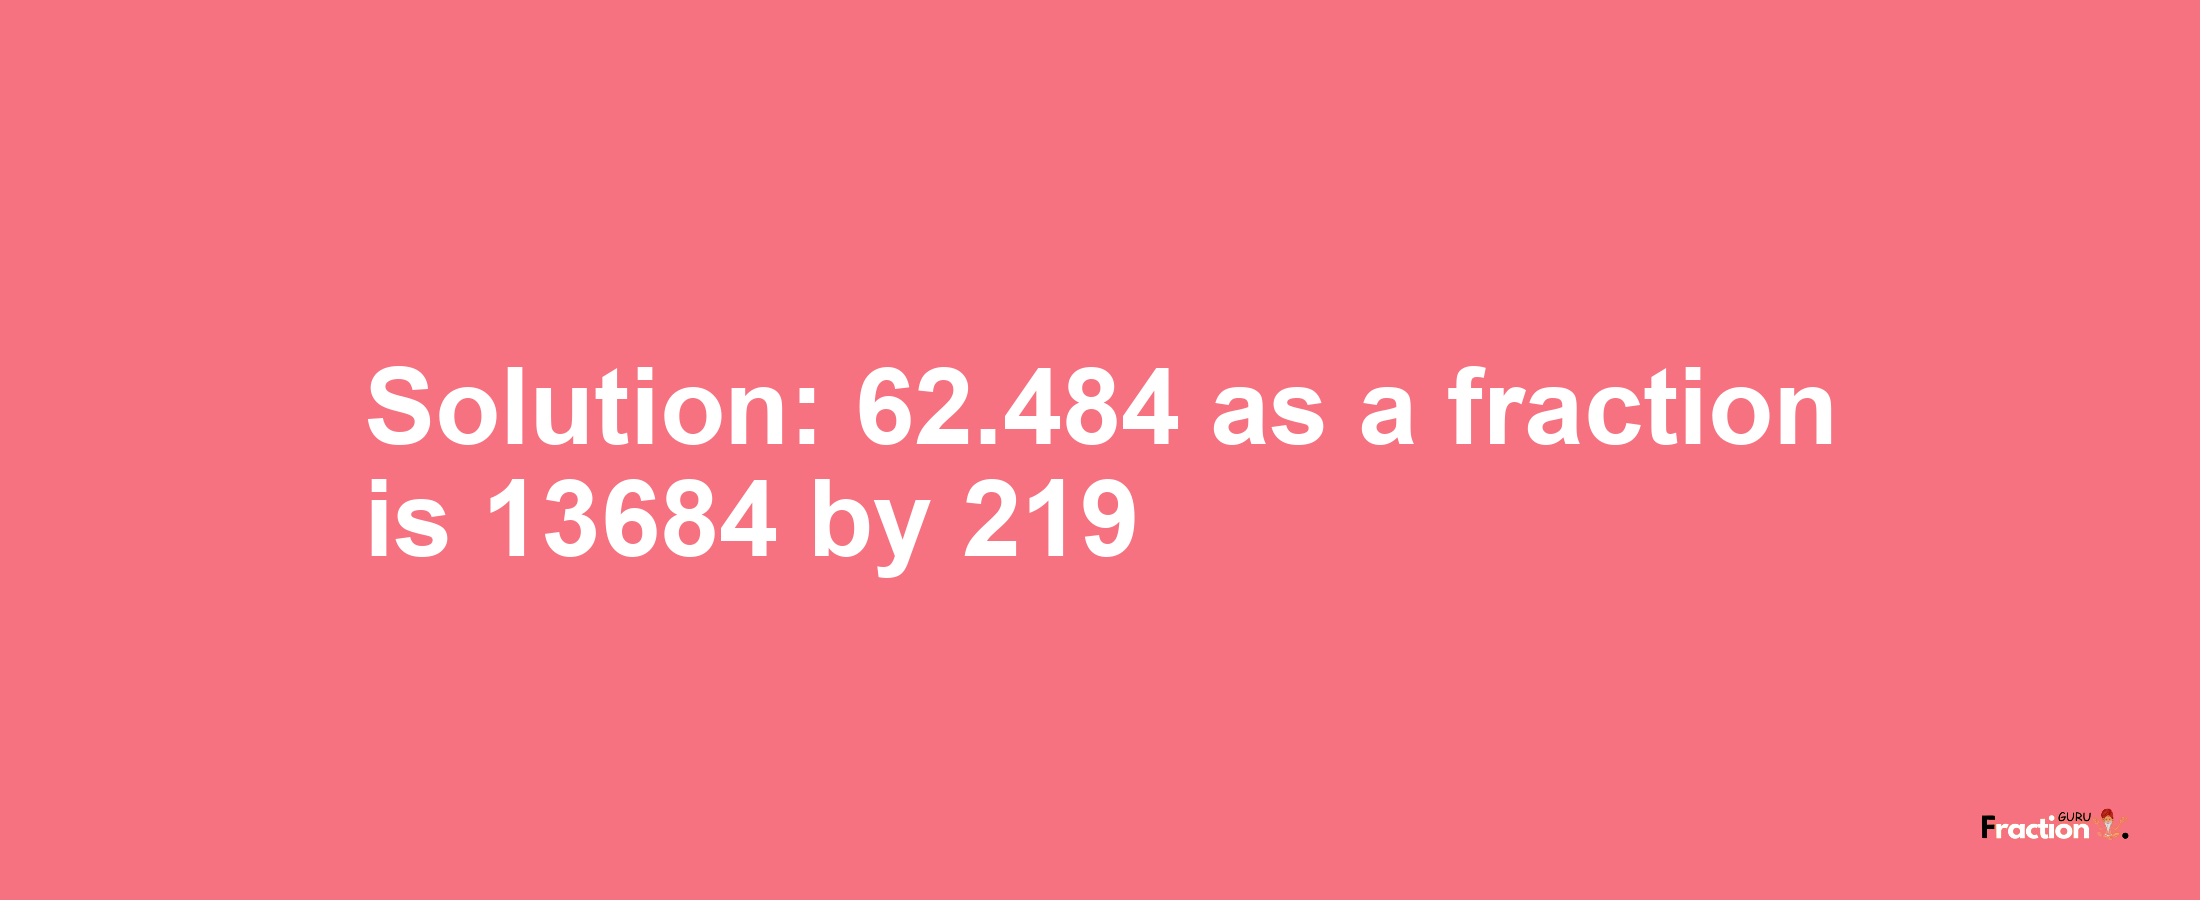 Solution:62.484 as a fraction is 13684/219